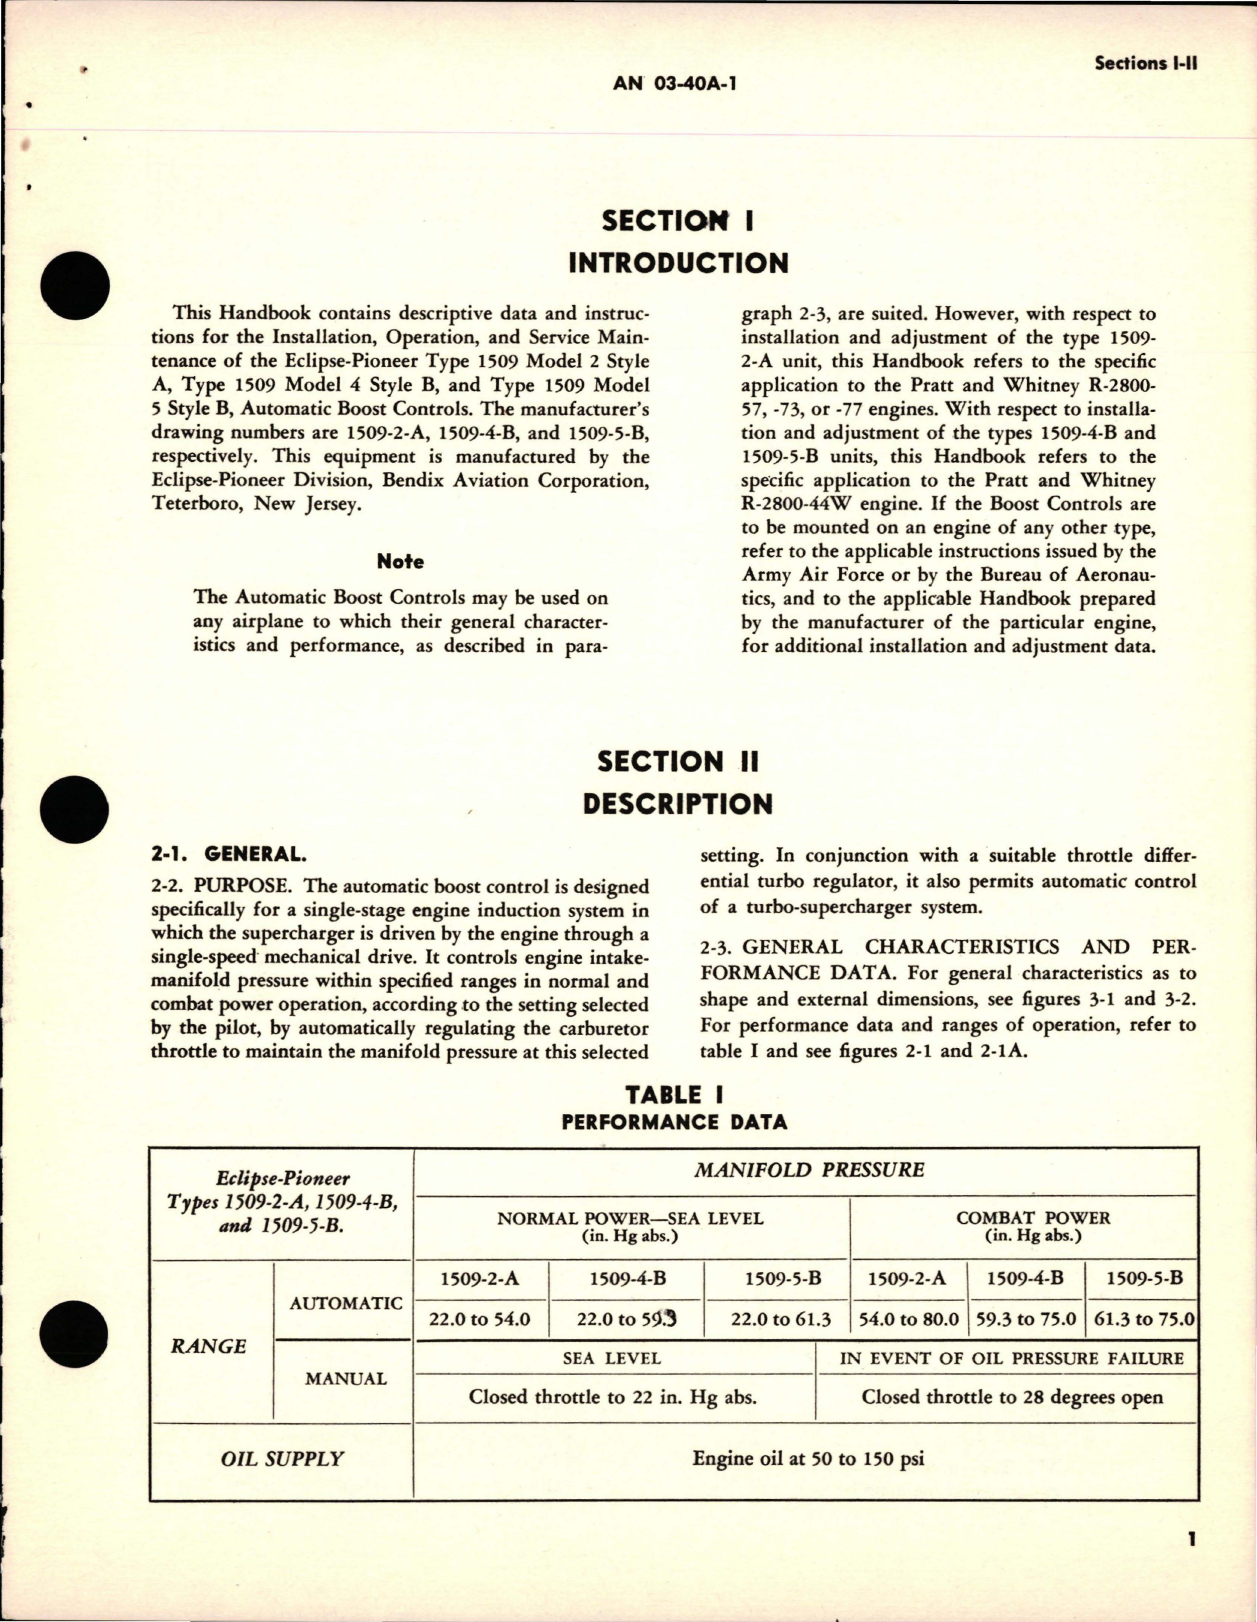 Sample page 7 from AirCorps Library document: Operation and Service Instructions for Automatic Boost Control - Types 1509-2-A, 1509-4-B, and 1509-5-B